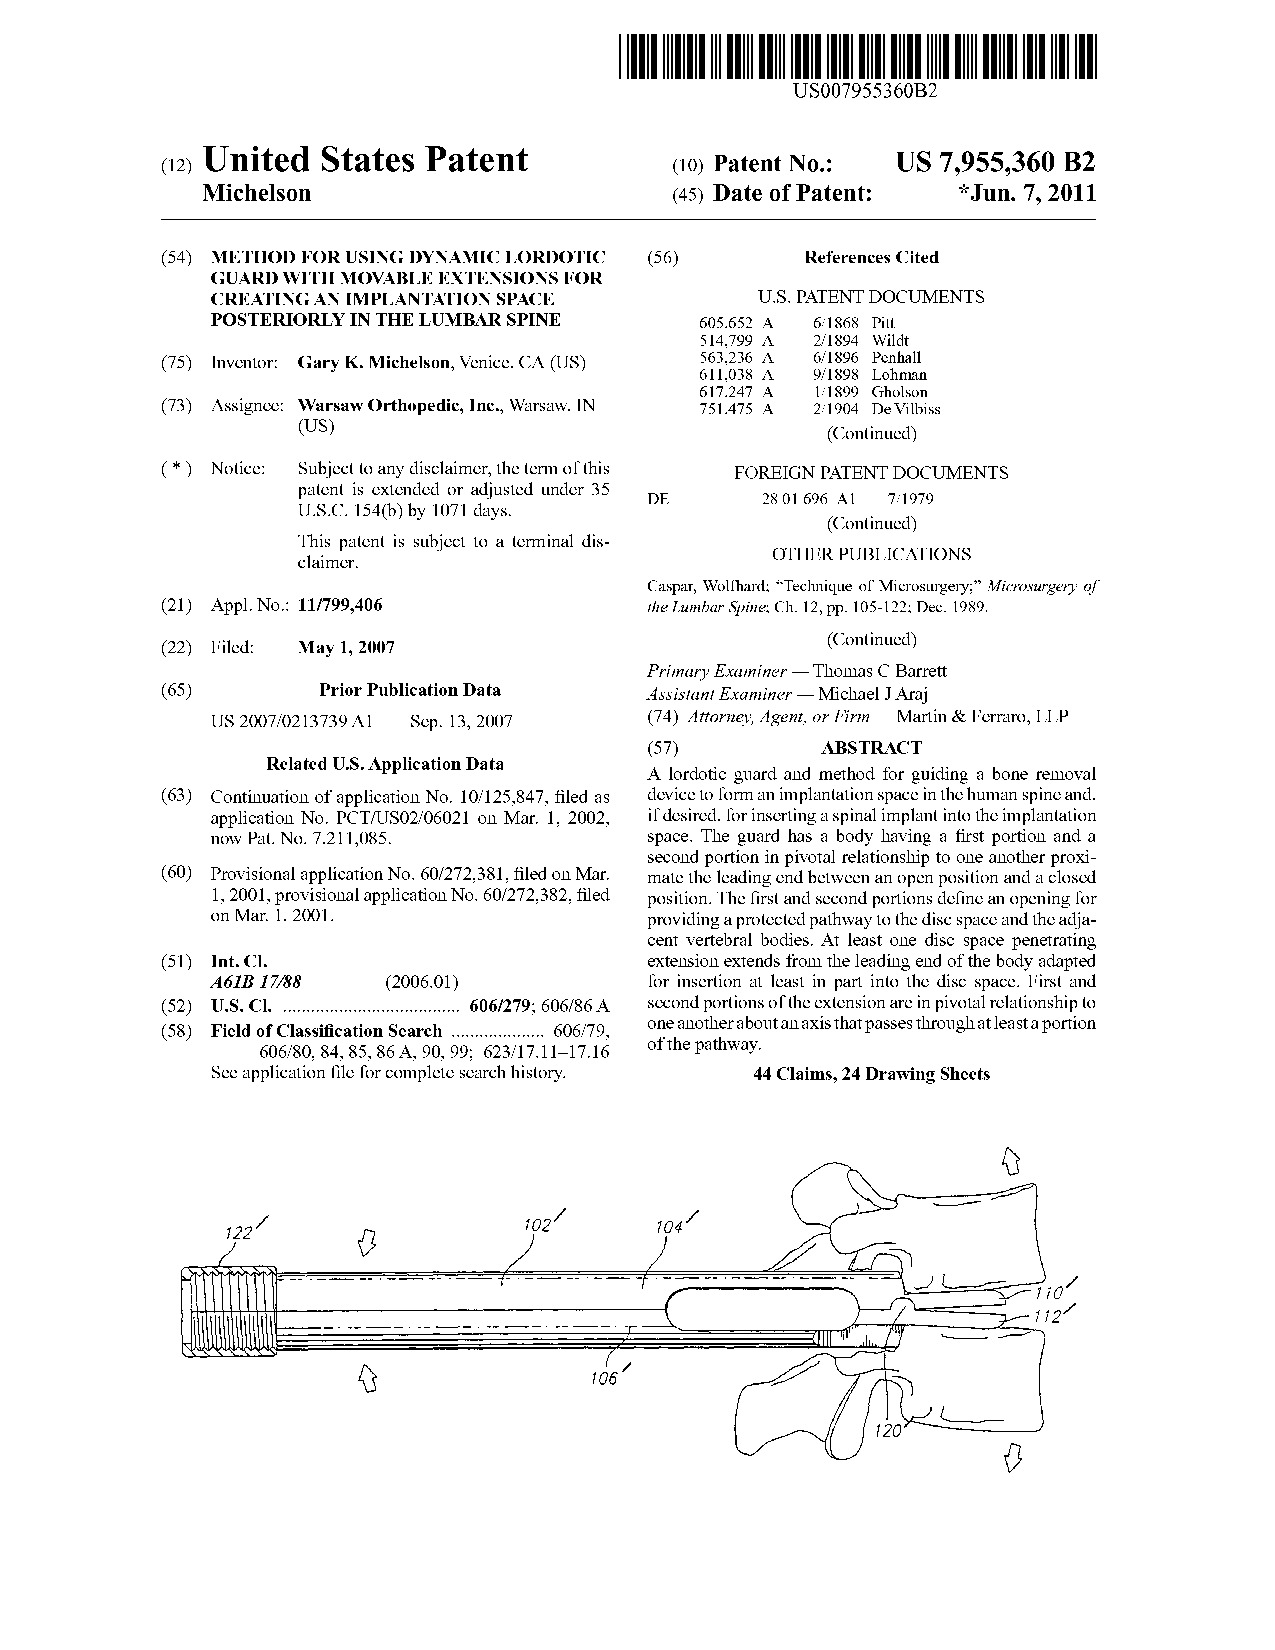 Method for using dynamic lordotic guard with movable extensions for     creating an implantation space posteriorly in the lumbar spine - Patent 7,955,360